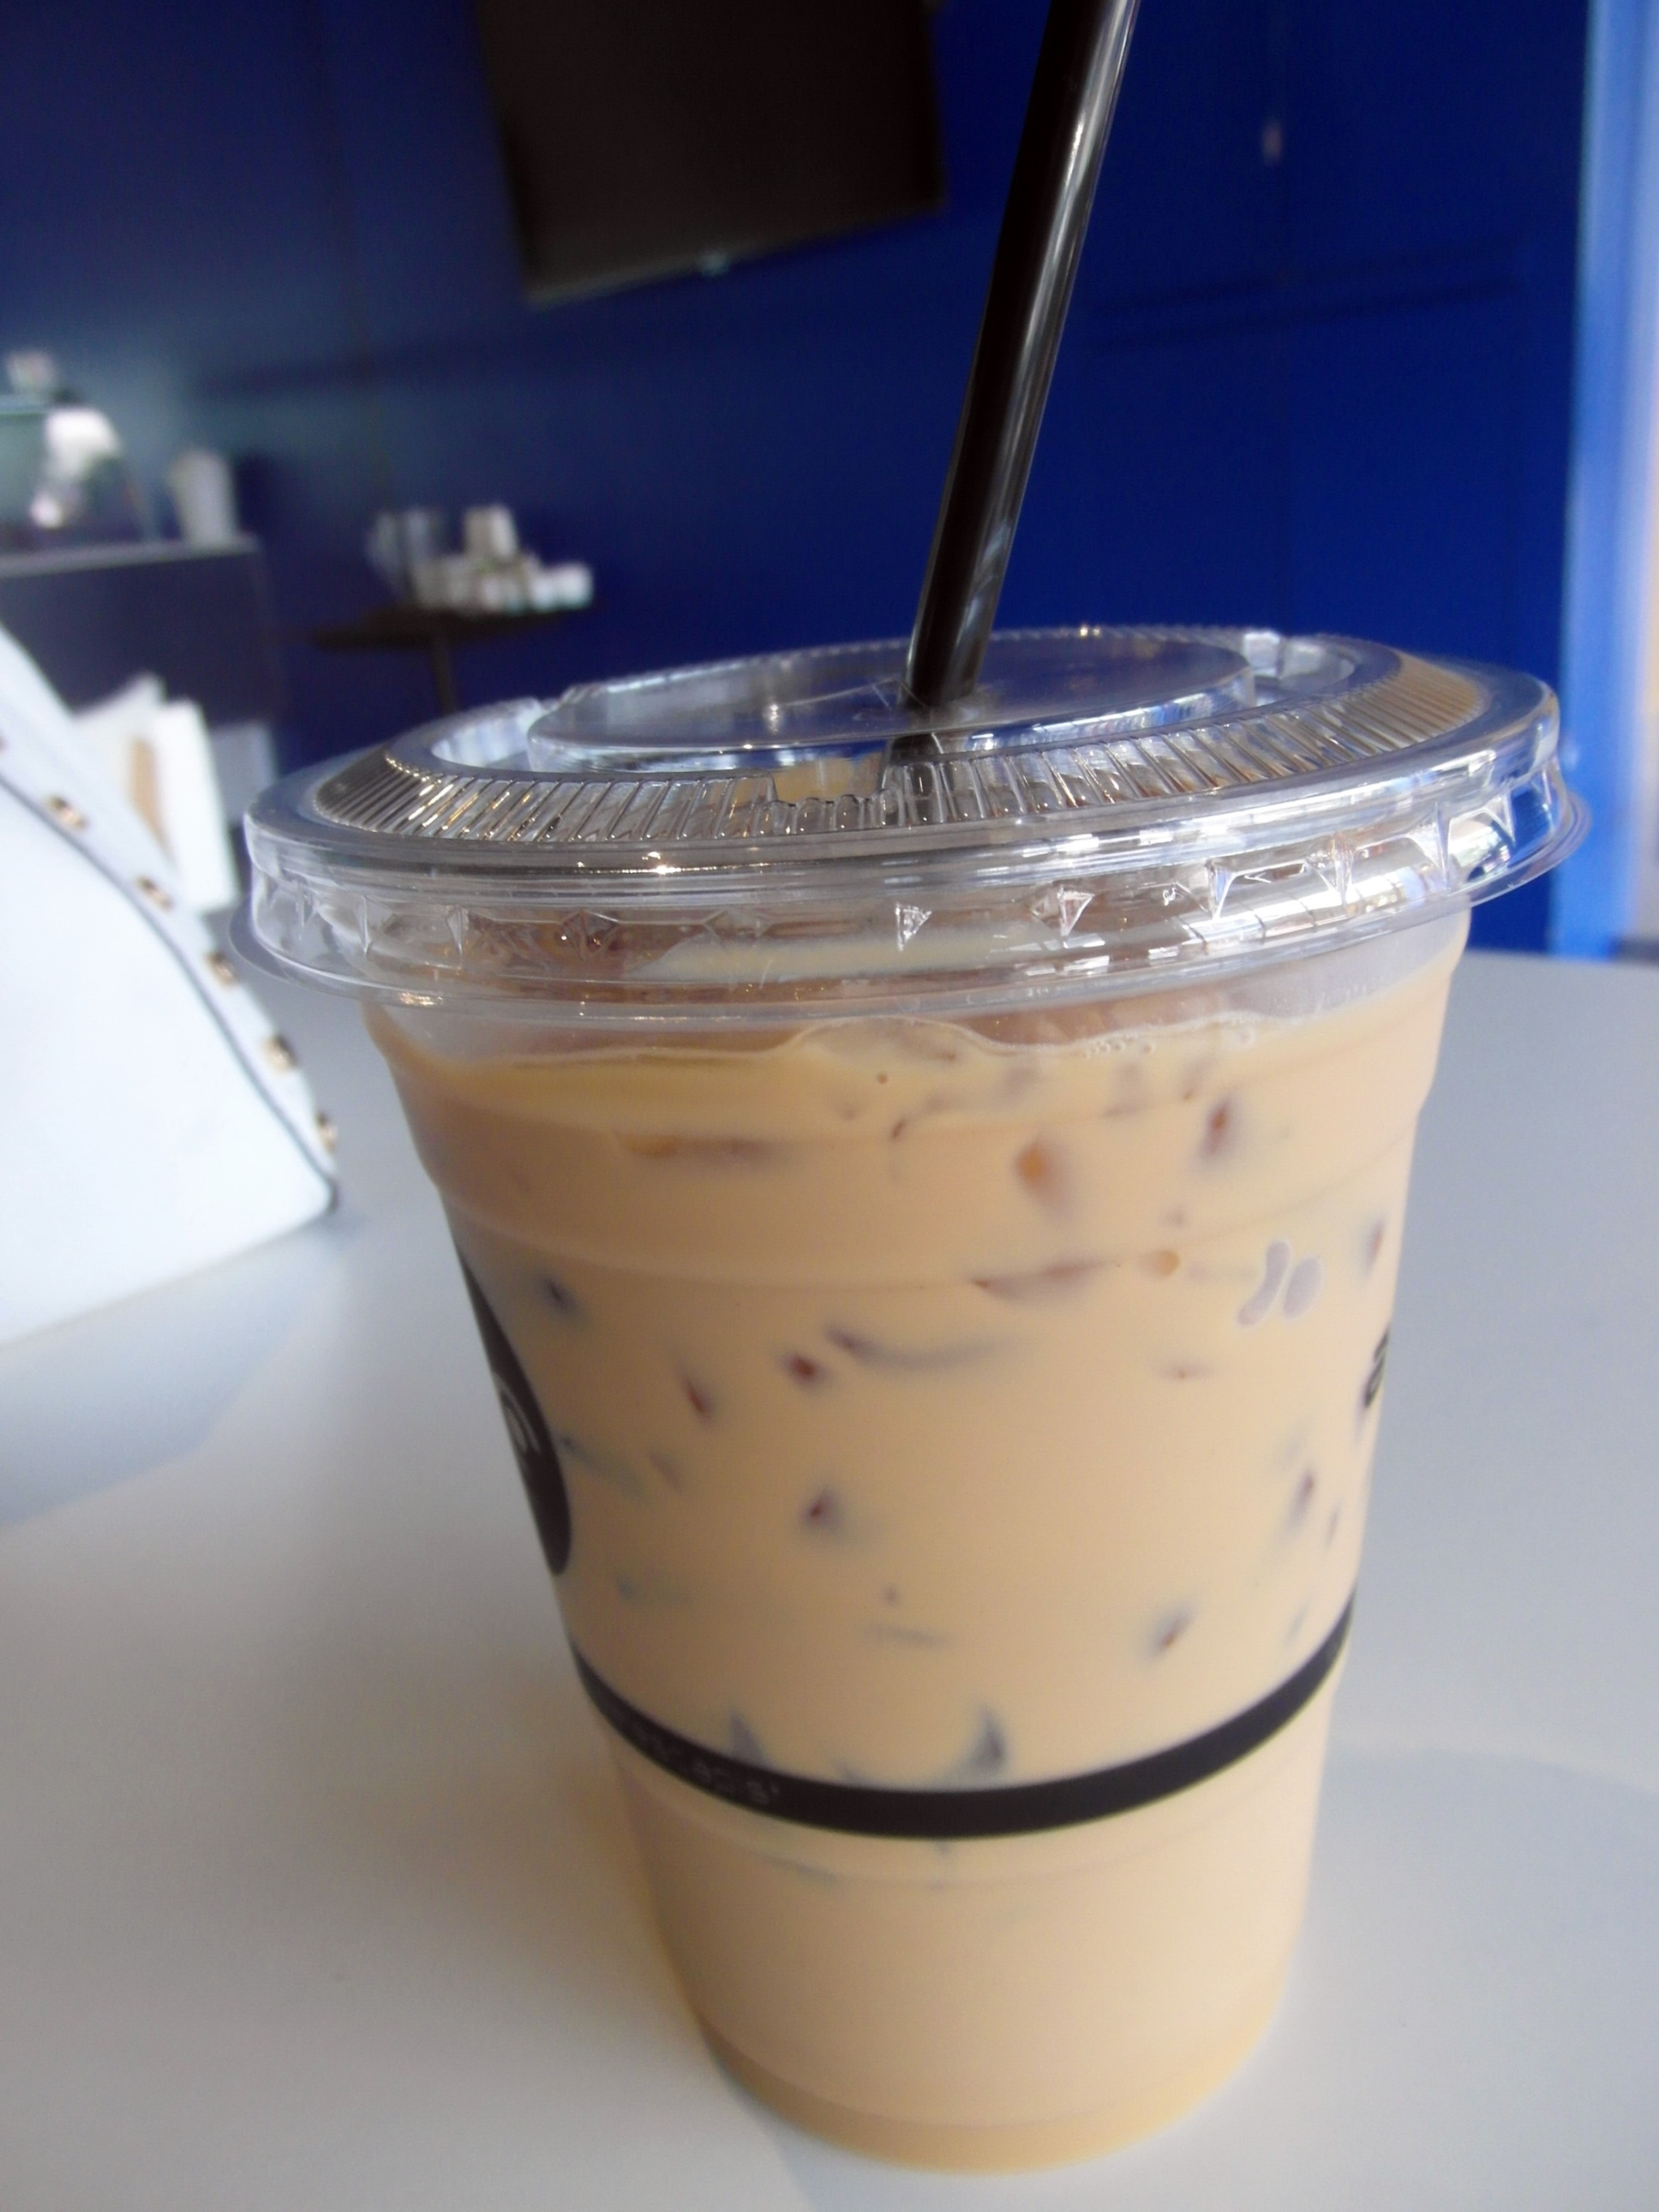 Iced coffee in a cafe photo